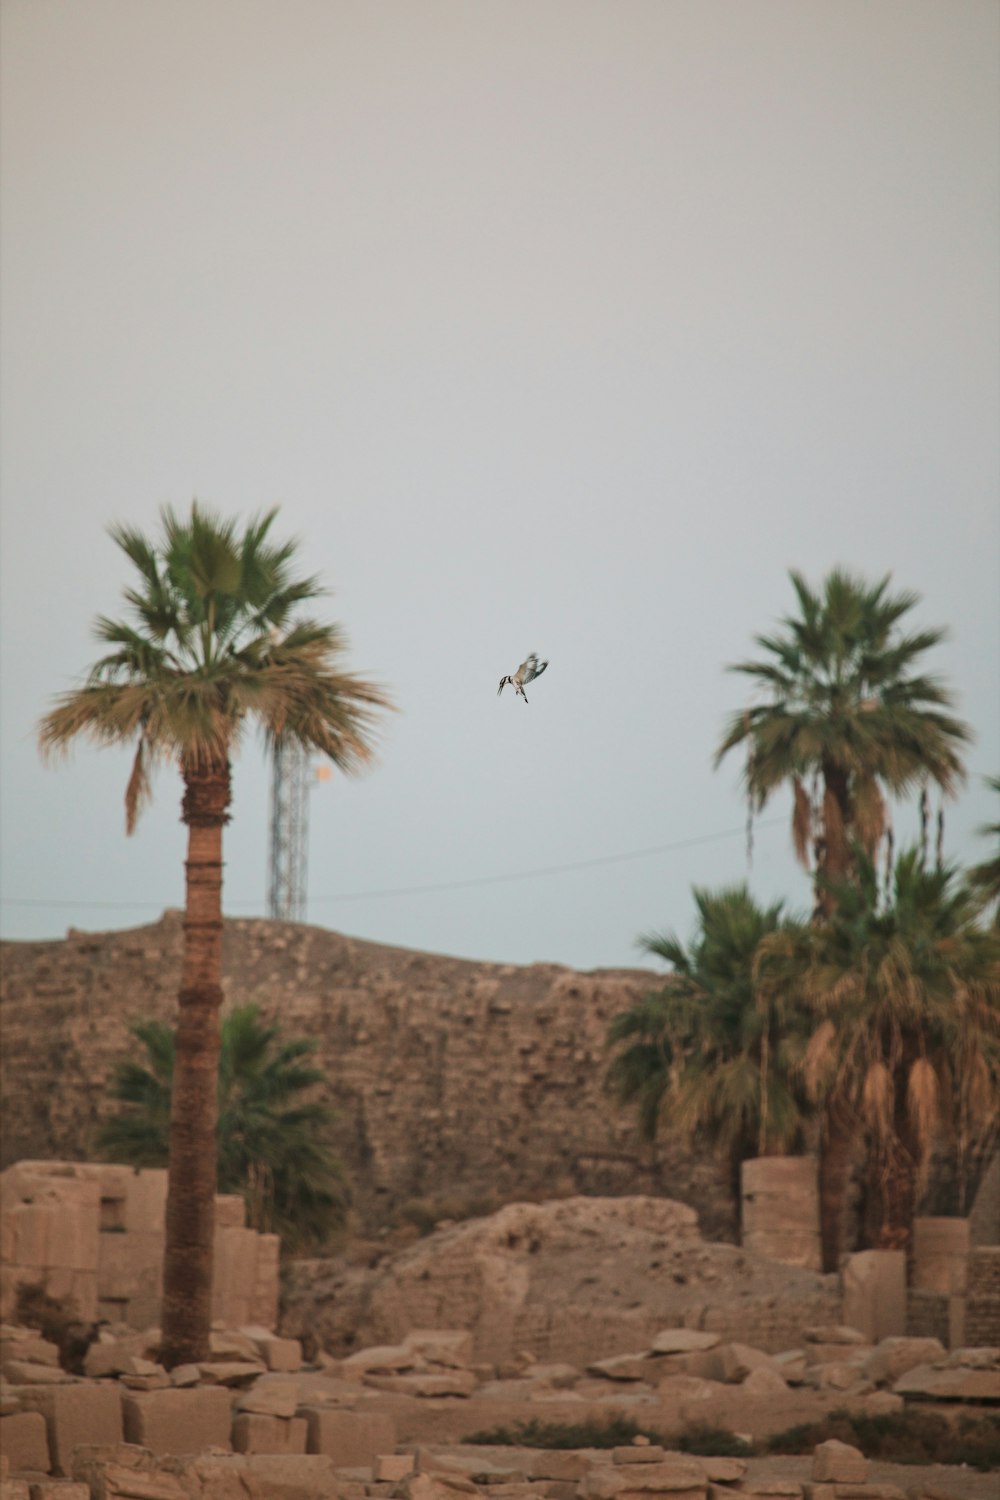 a plane flying over a rocky area with palm trees